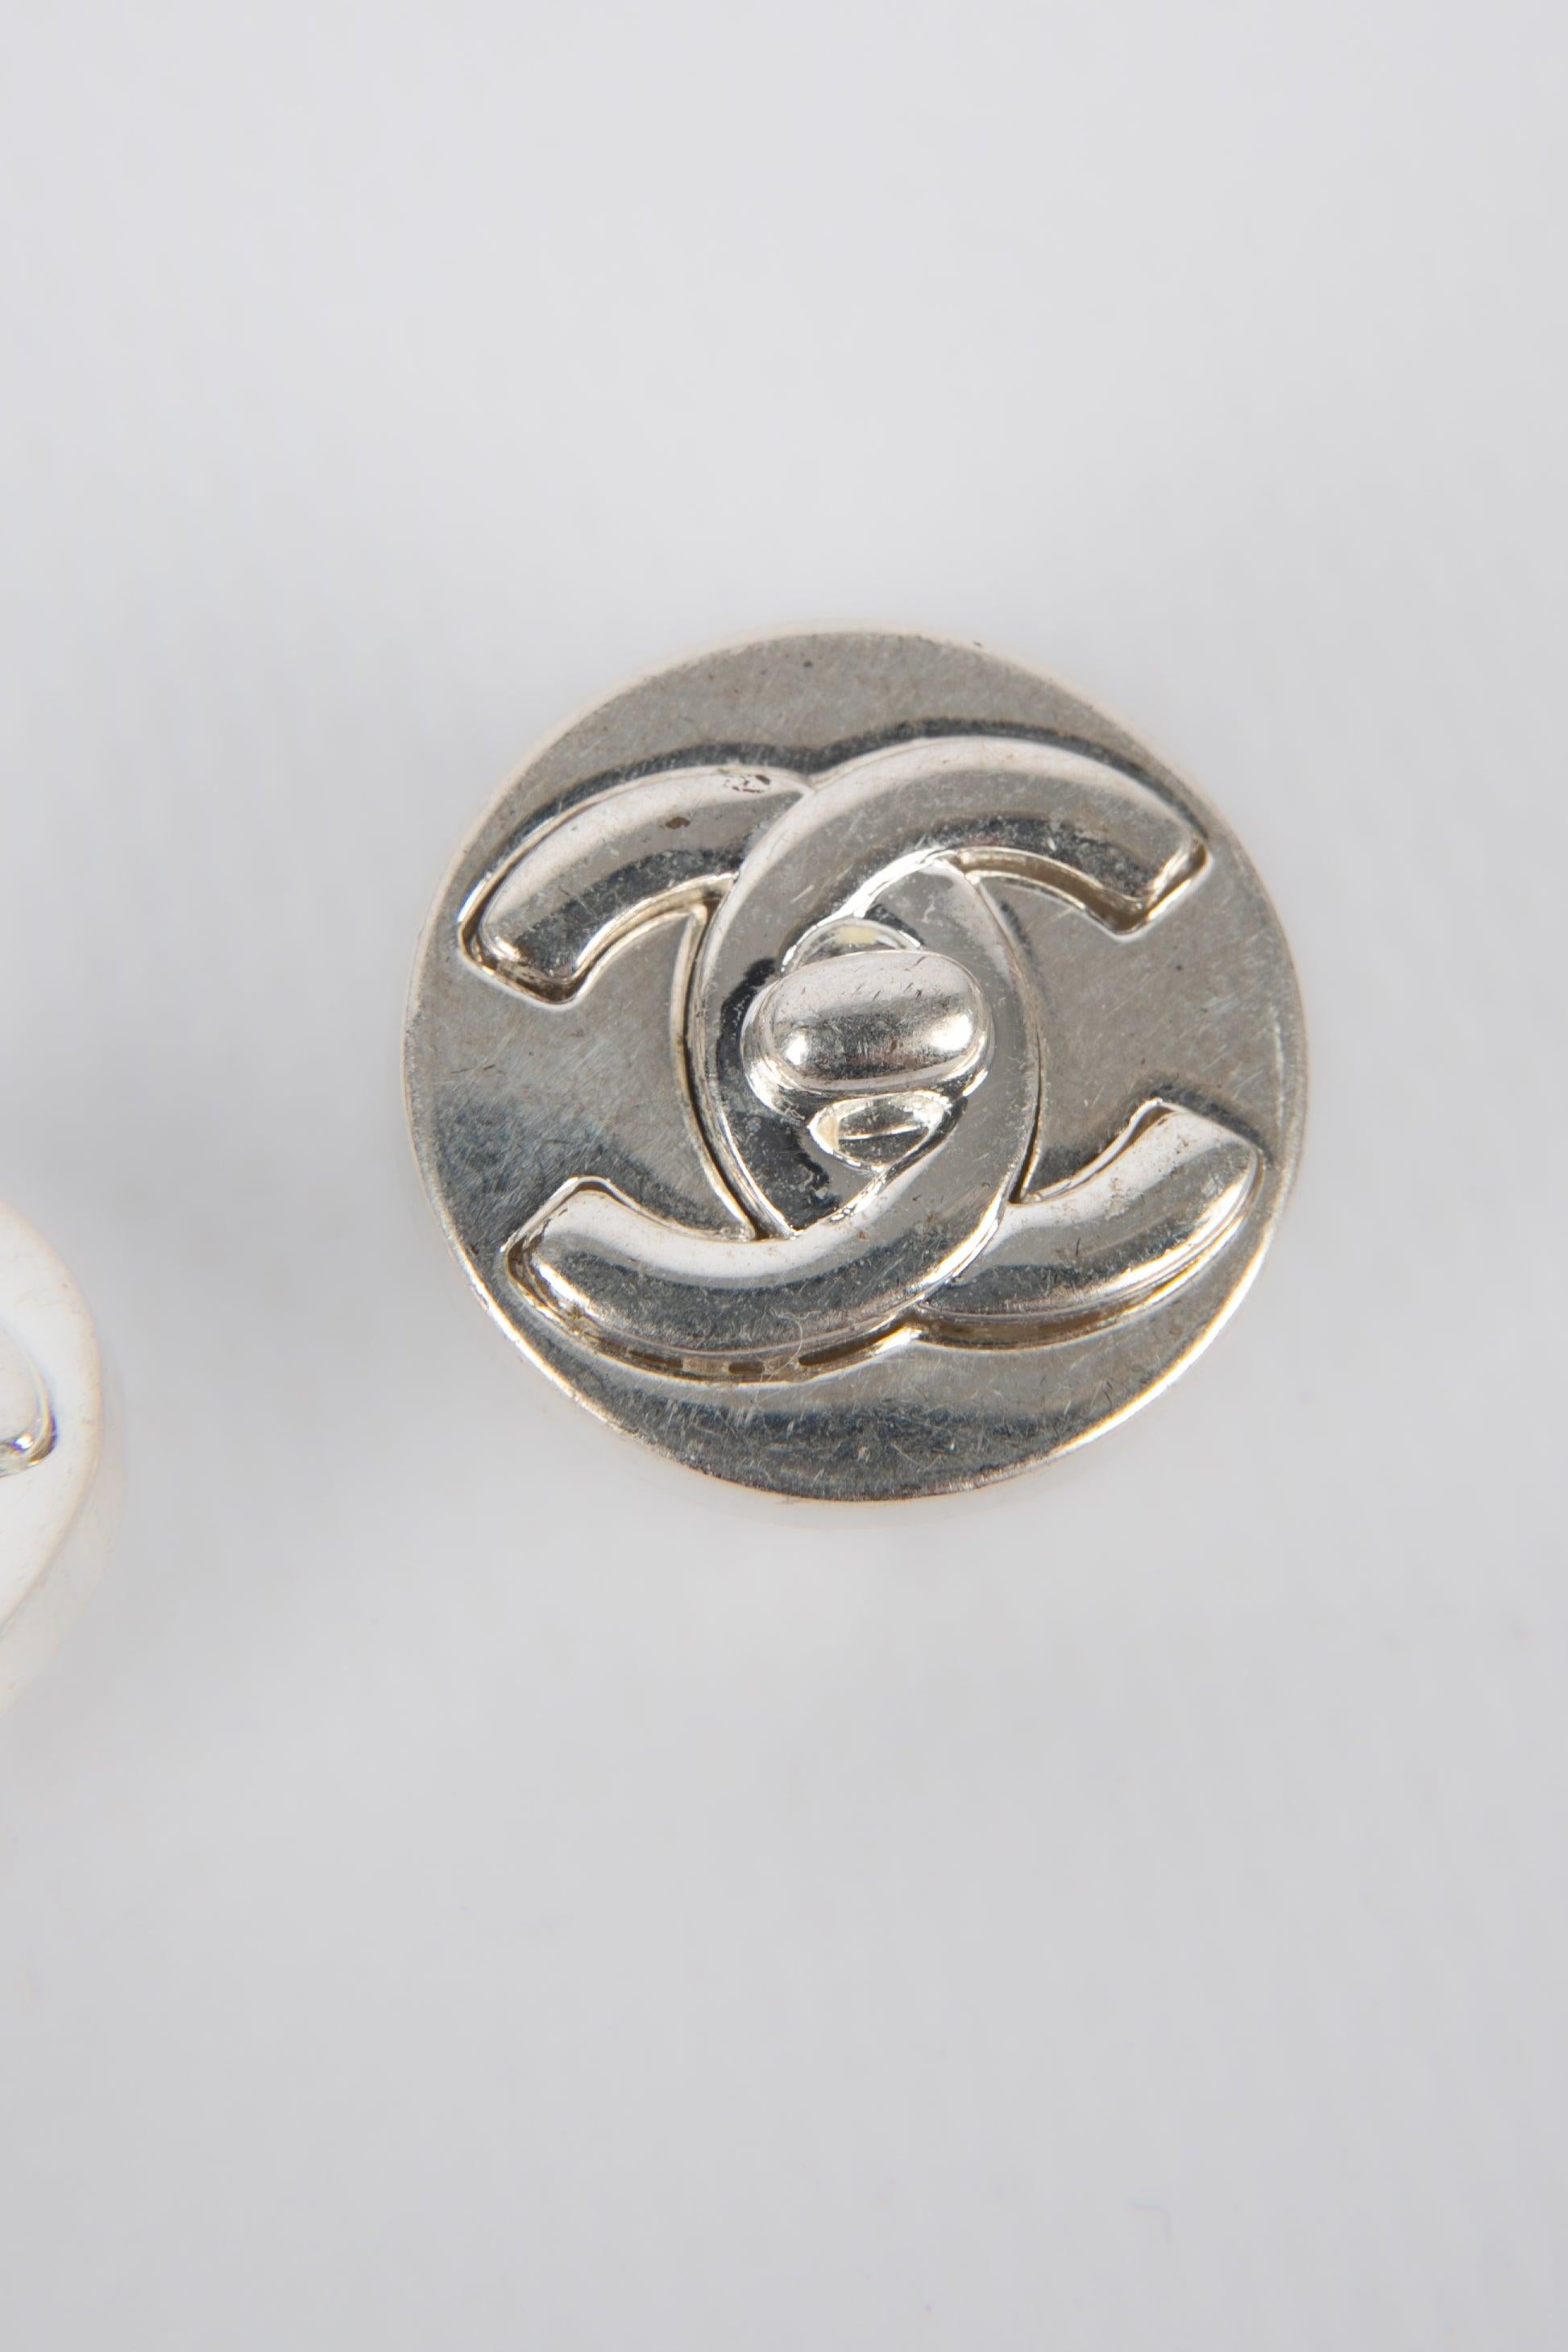 Chanel- (Made in France) Silvery metal circular earrings. 1997 Fall-Winter Turnlock Collection.

Additional information:
Condition: Good condition
Dimensions: Diameter: 1.8 cm
Period: 20th Century

Seller Reference: BOB60
